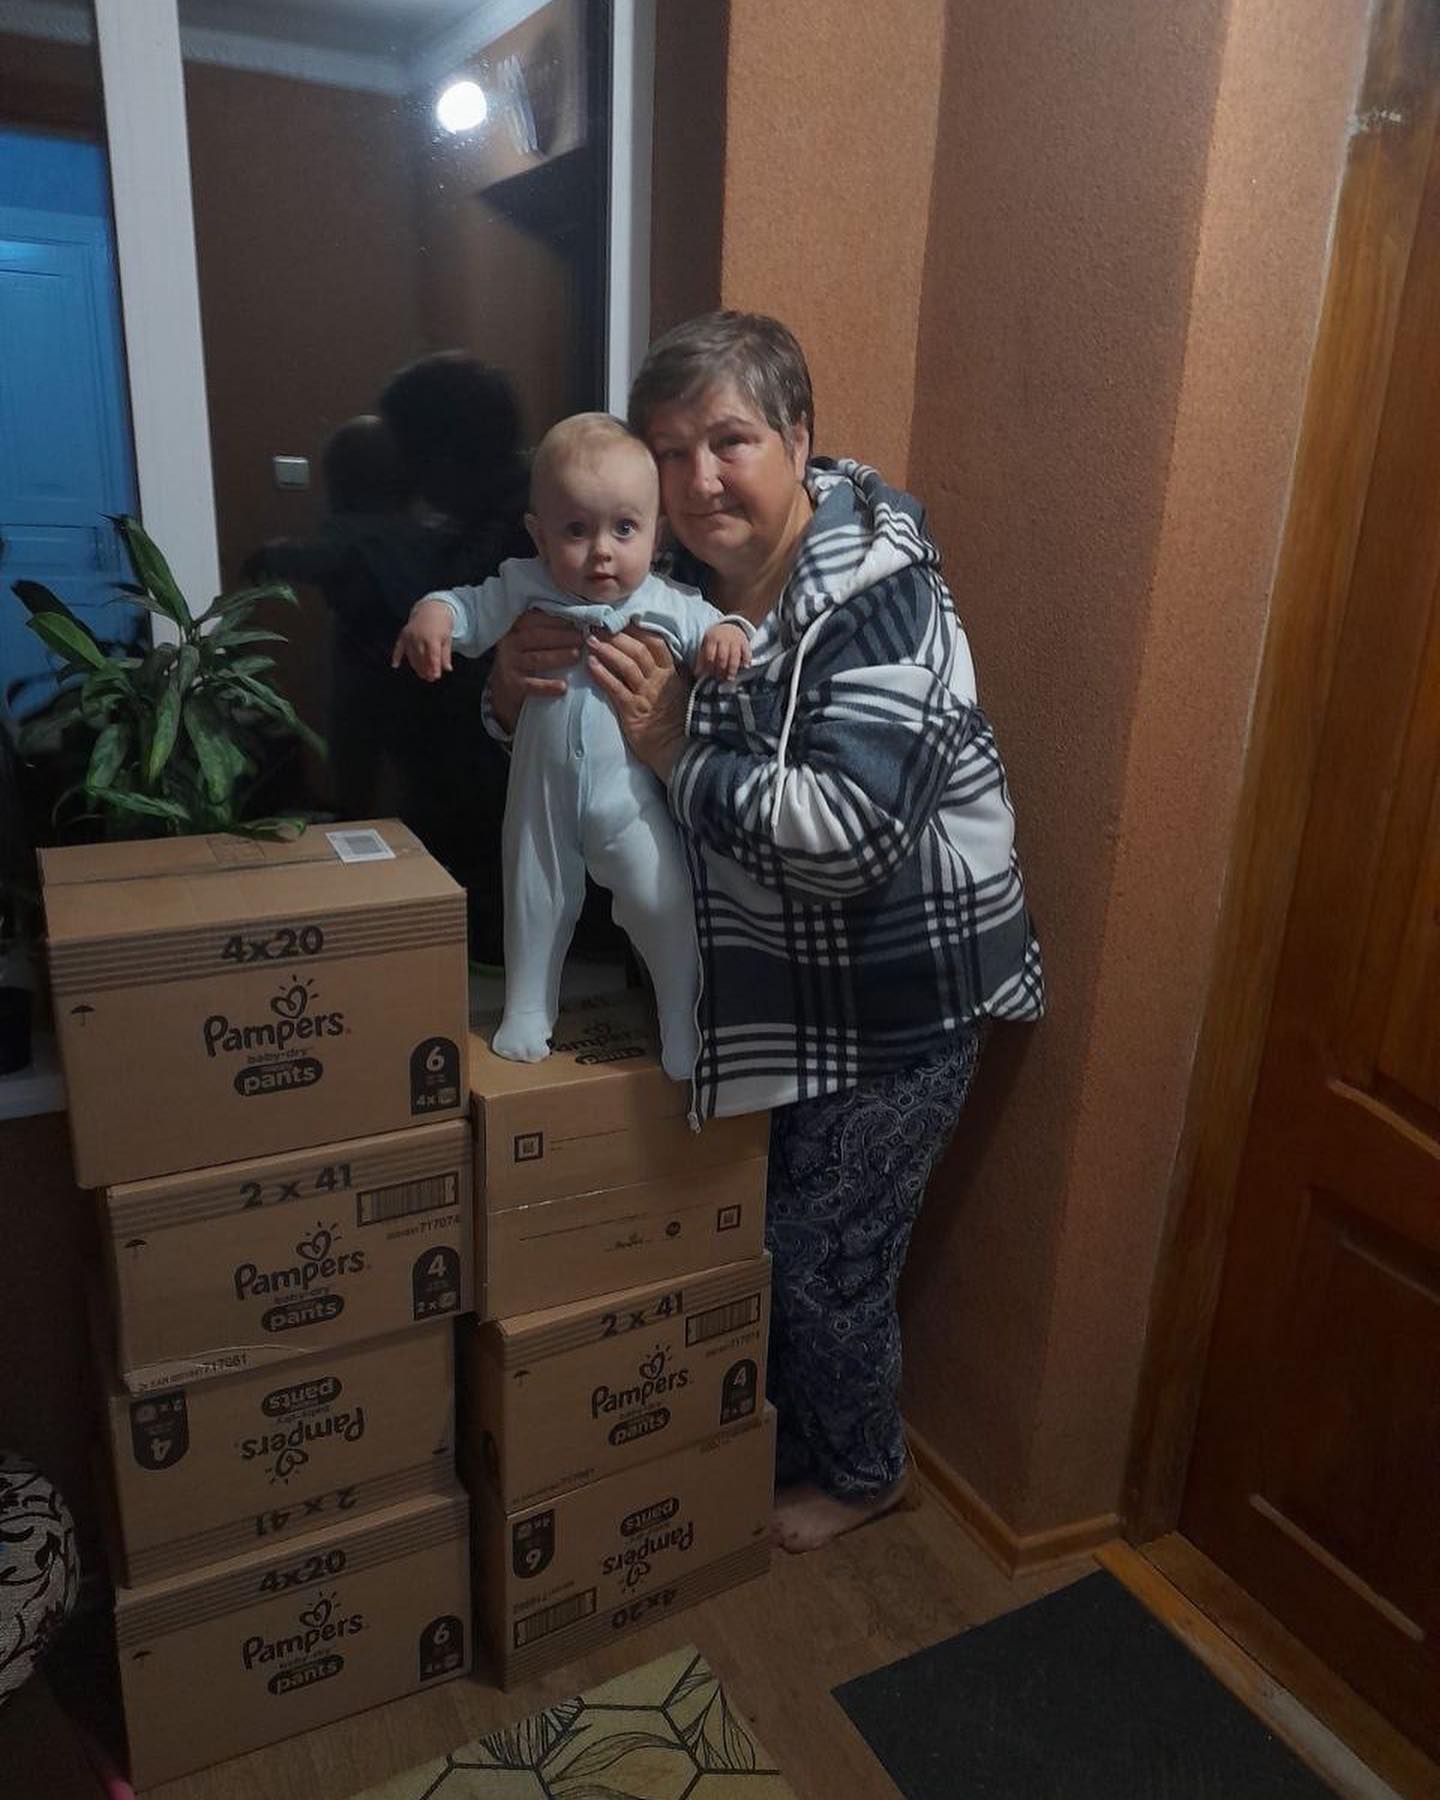 A woman holding a baby in front of a stack of boxes.